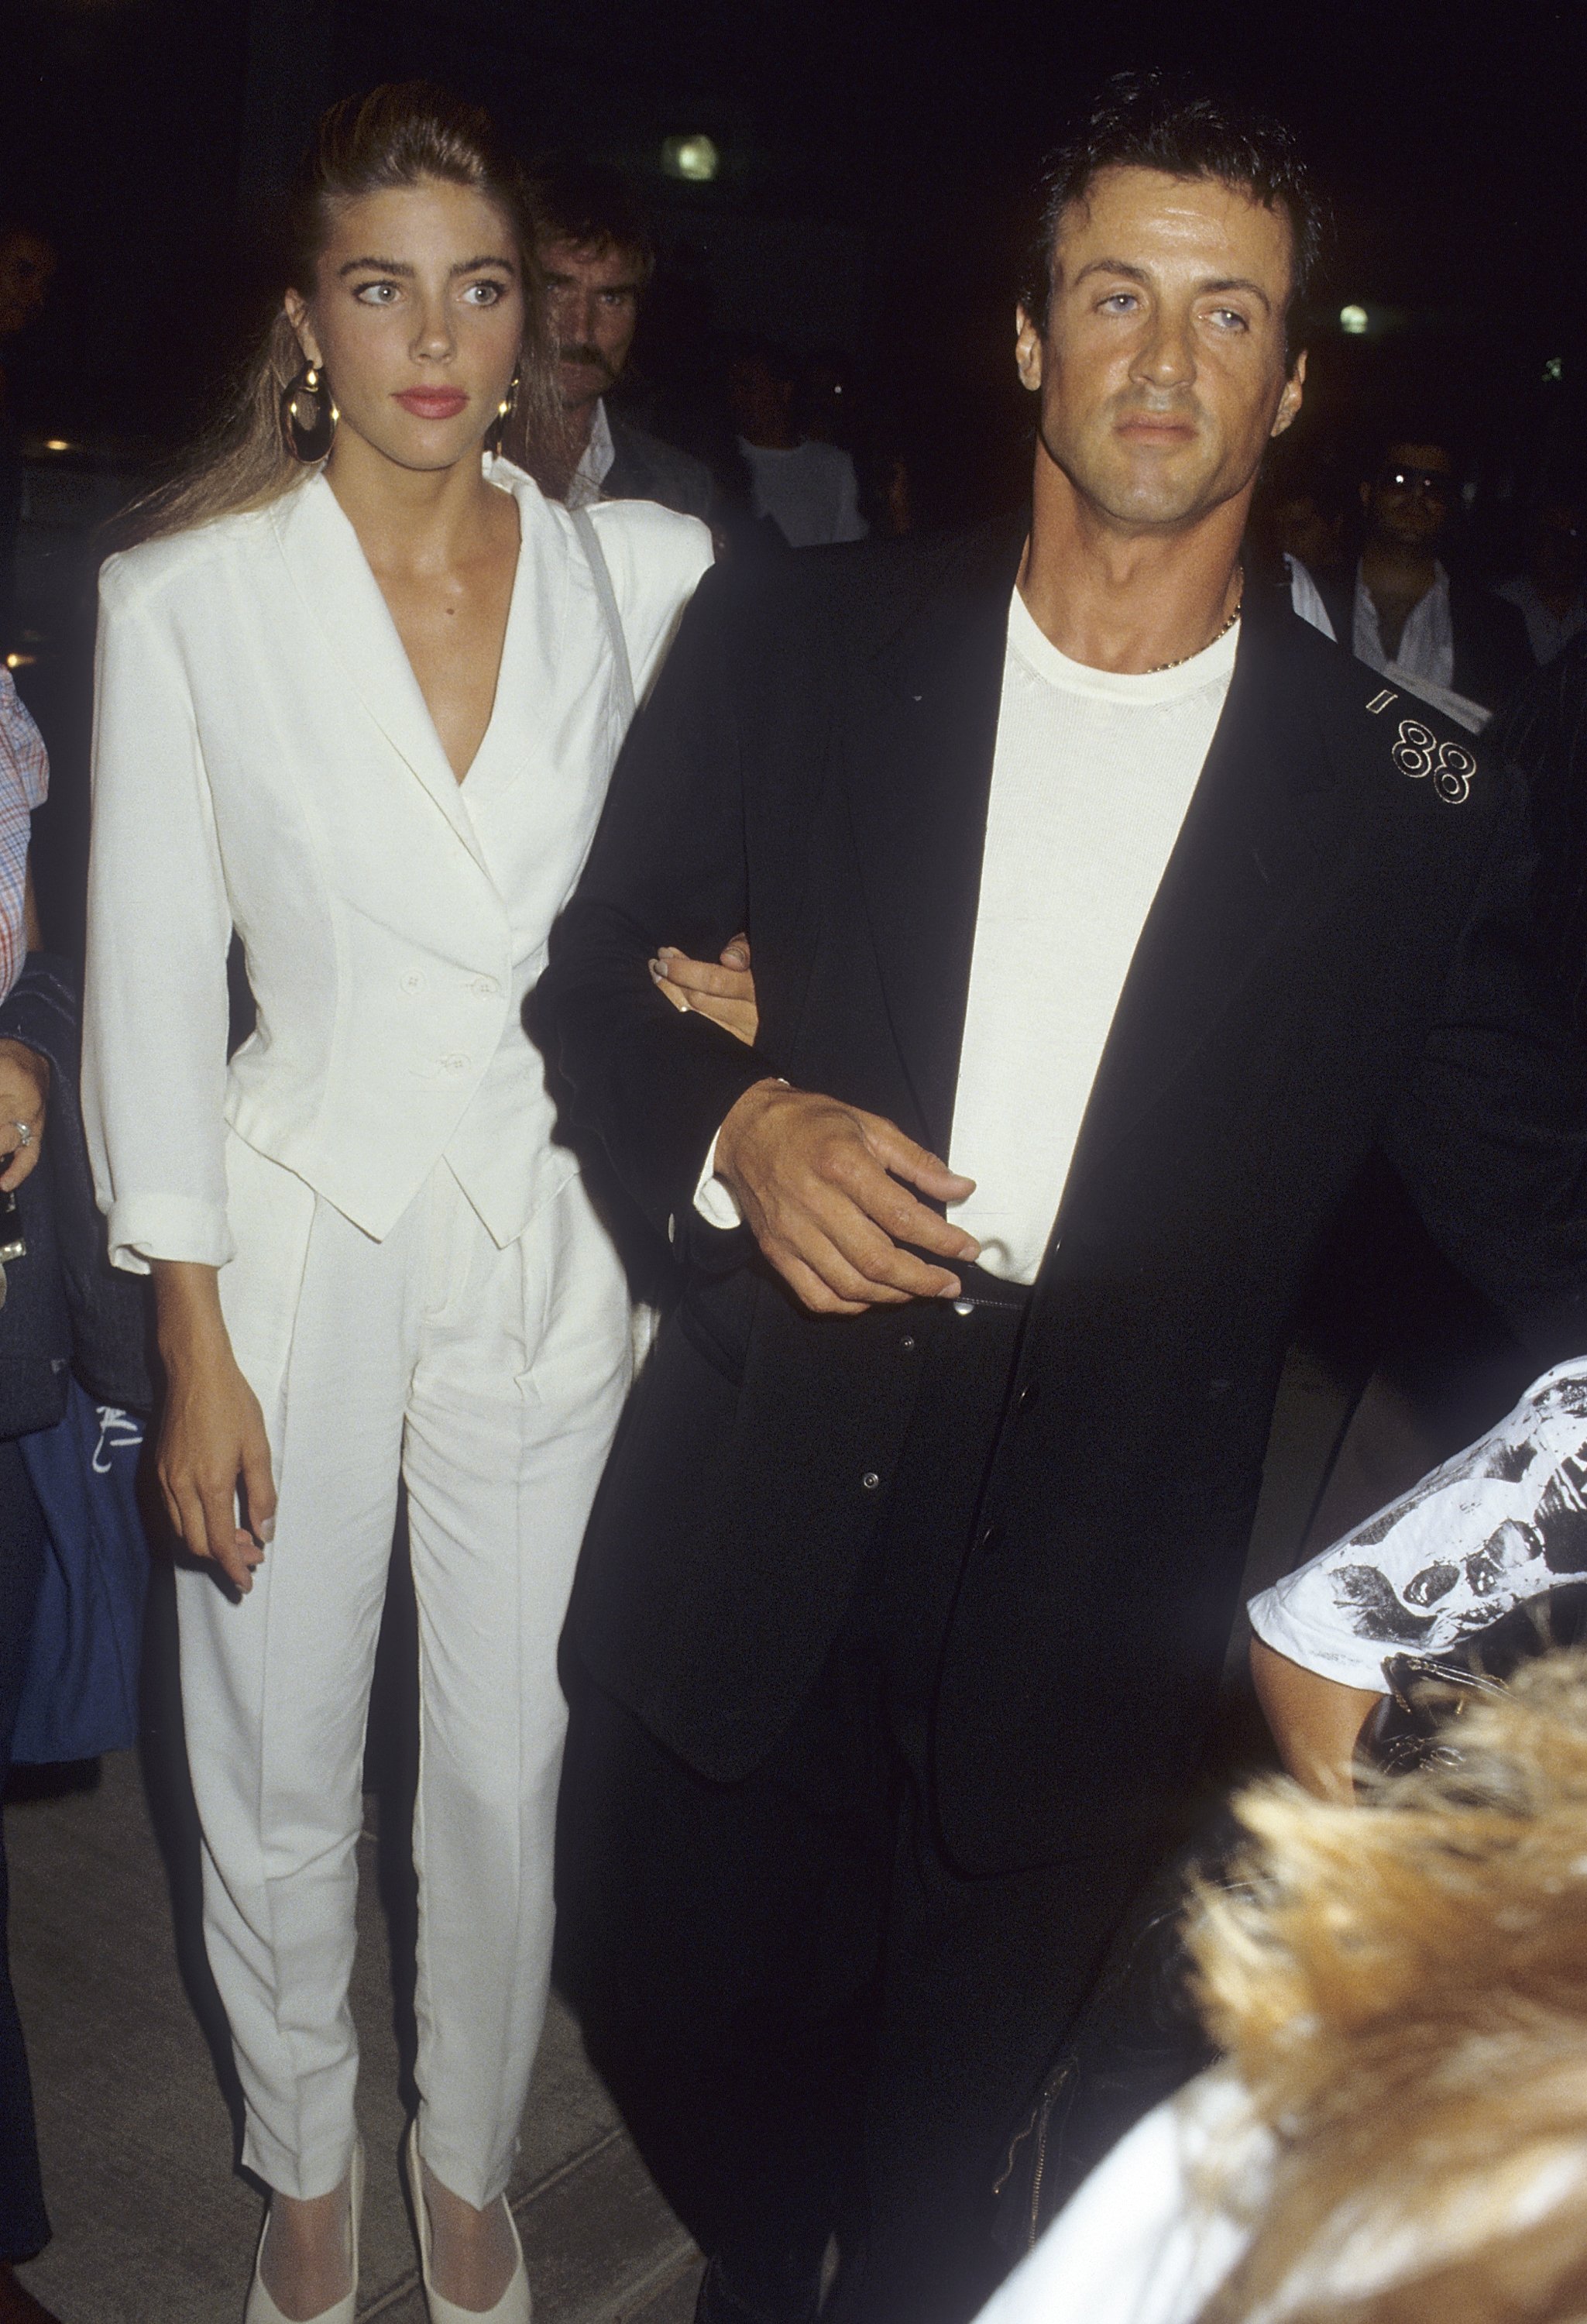 Actor Sylvester Stallone and date Jennifer Flavin attend Mike O'Hara's Power Polo and Cocktail Reception to Benefit Vital Options on August 26, 1988 at the Los Angeles Equestrian Center in Burbank, California. | Source: Getty Images